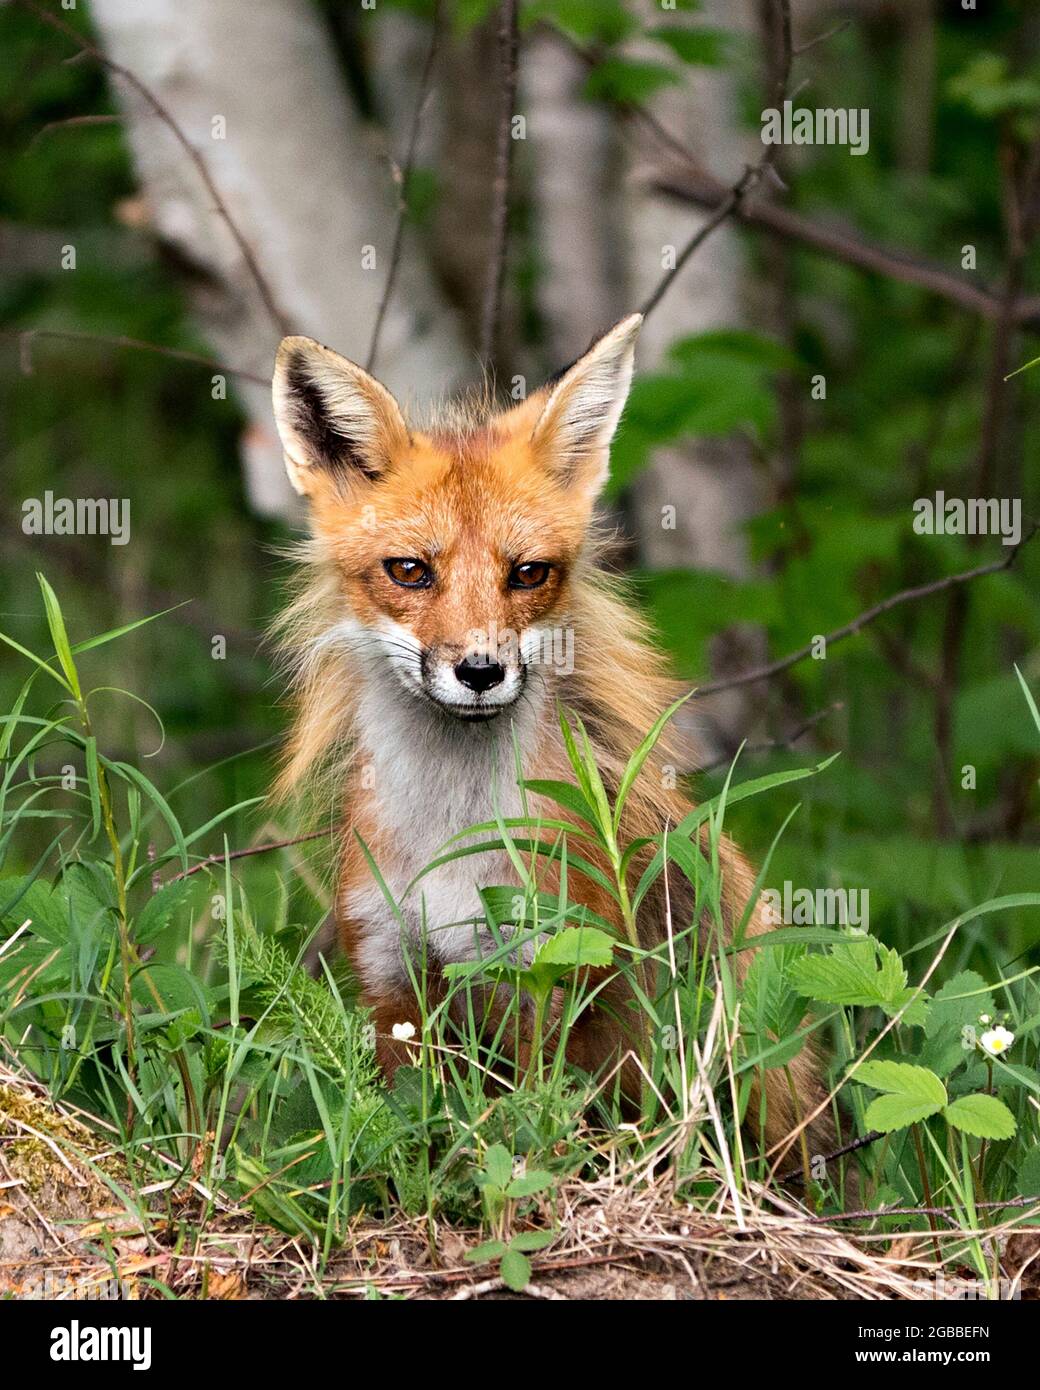 Red fox head shot close-up profile view looking at camera with a blur forest and birch trees background and enjoying its environment and habitat. Fox Stock Photo